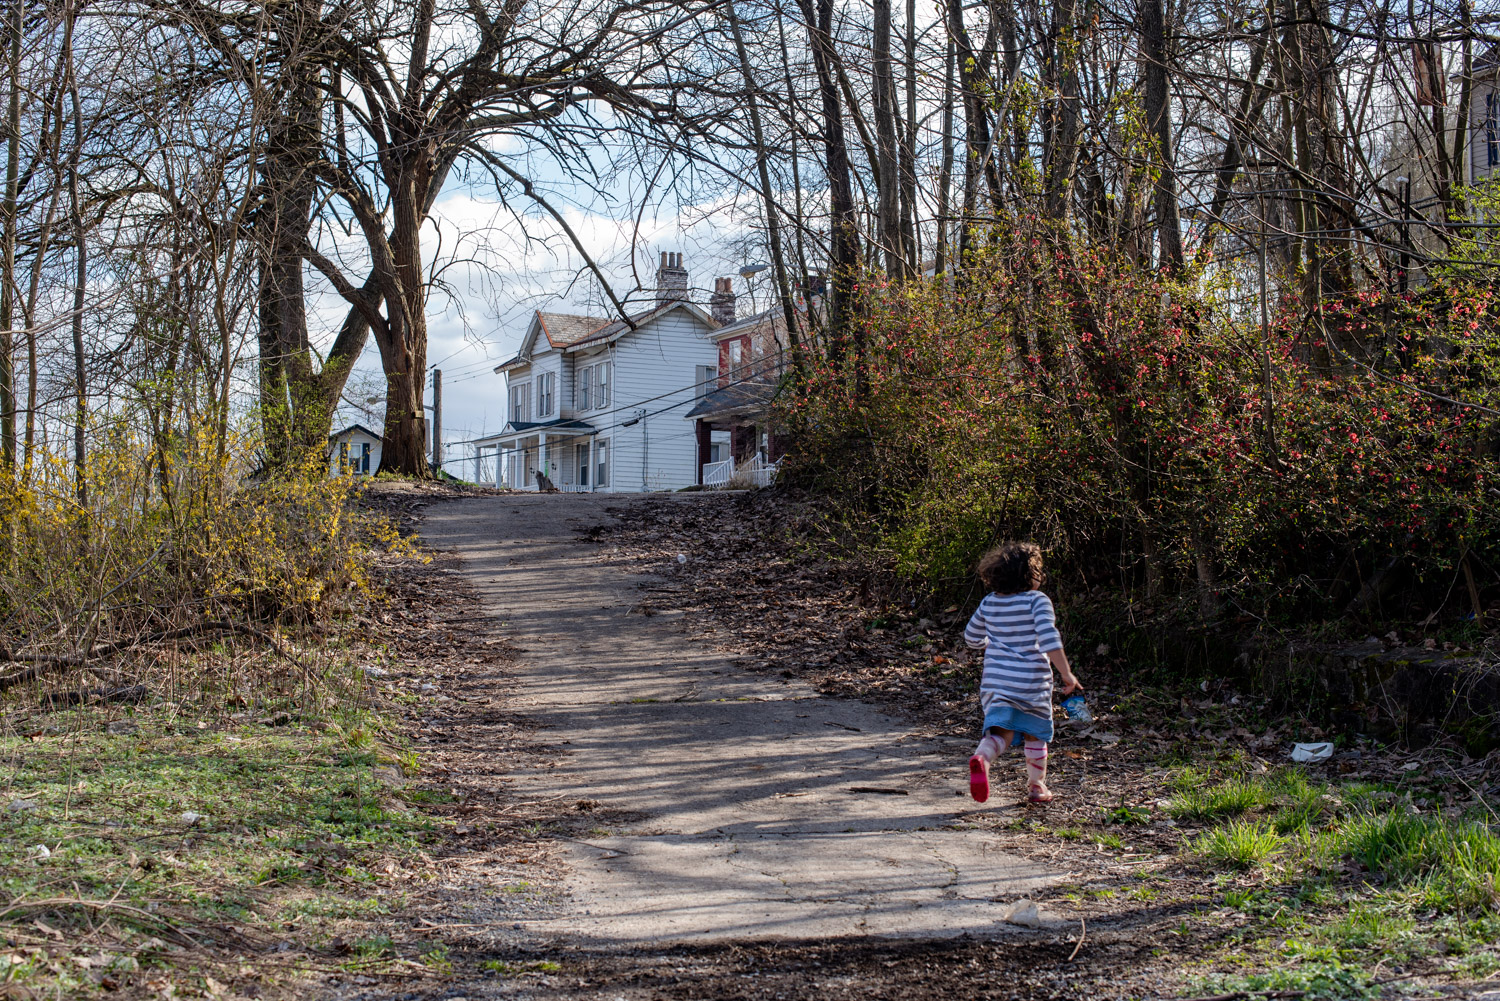 Photo of a child running along a former access road at the St. Johns Community Conservation project. Trees and flowering bushes surround the child as the site returns to a natural state.